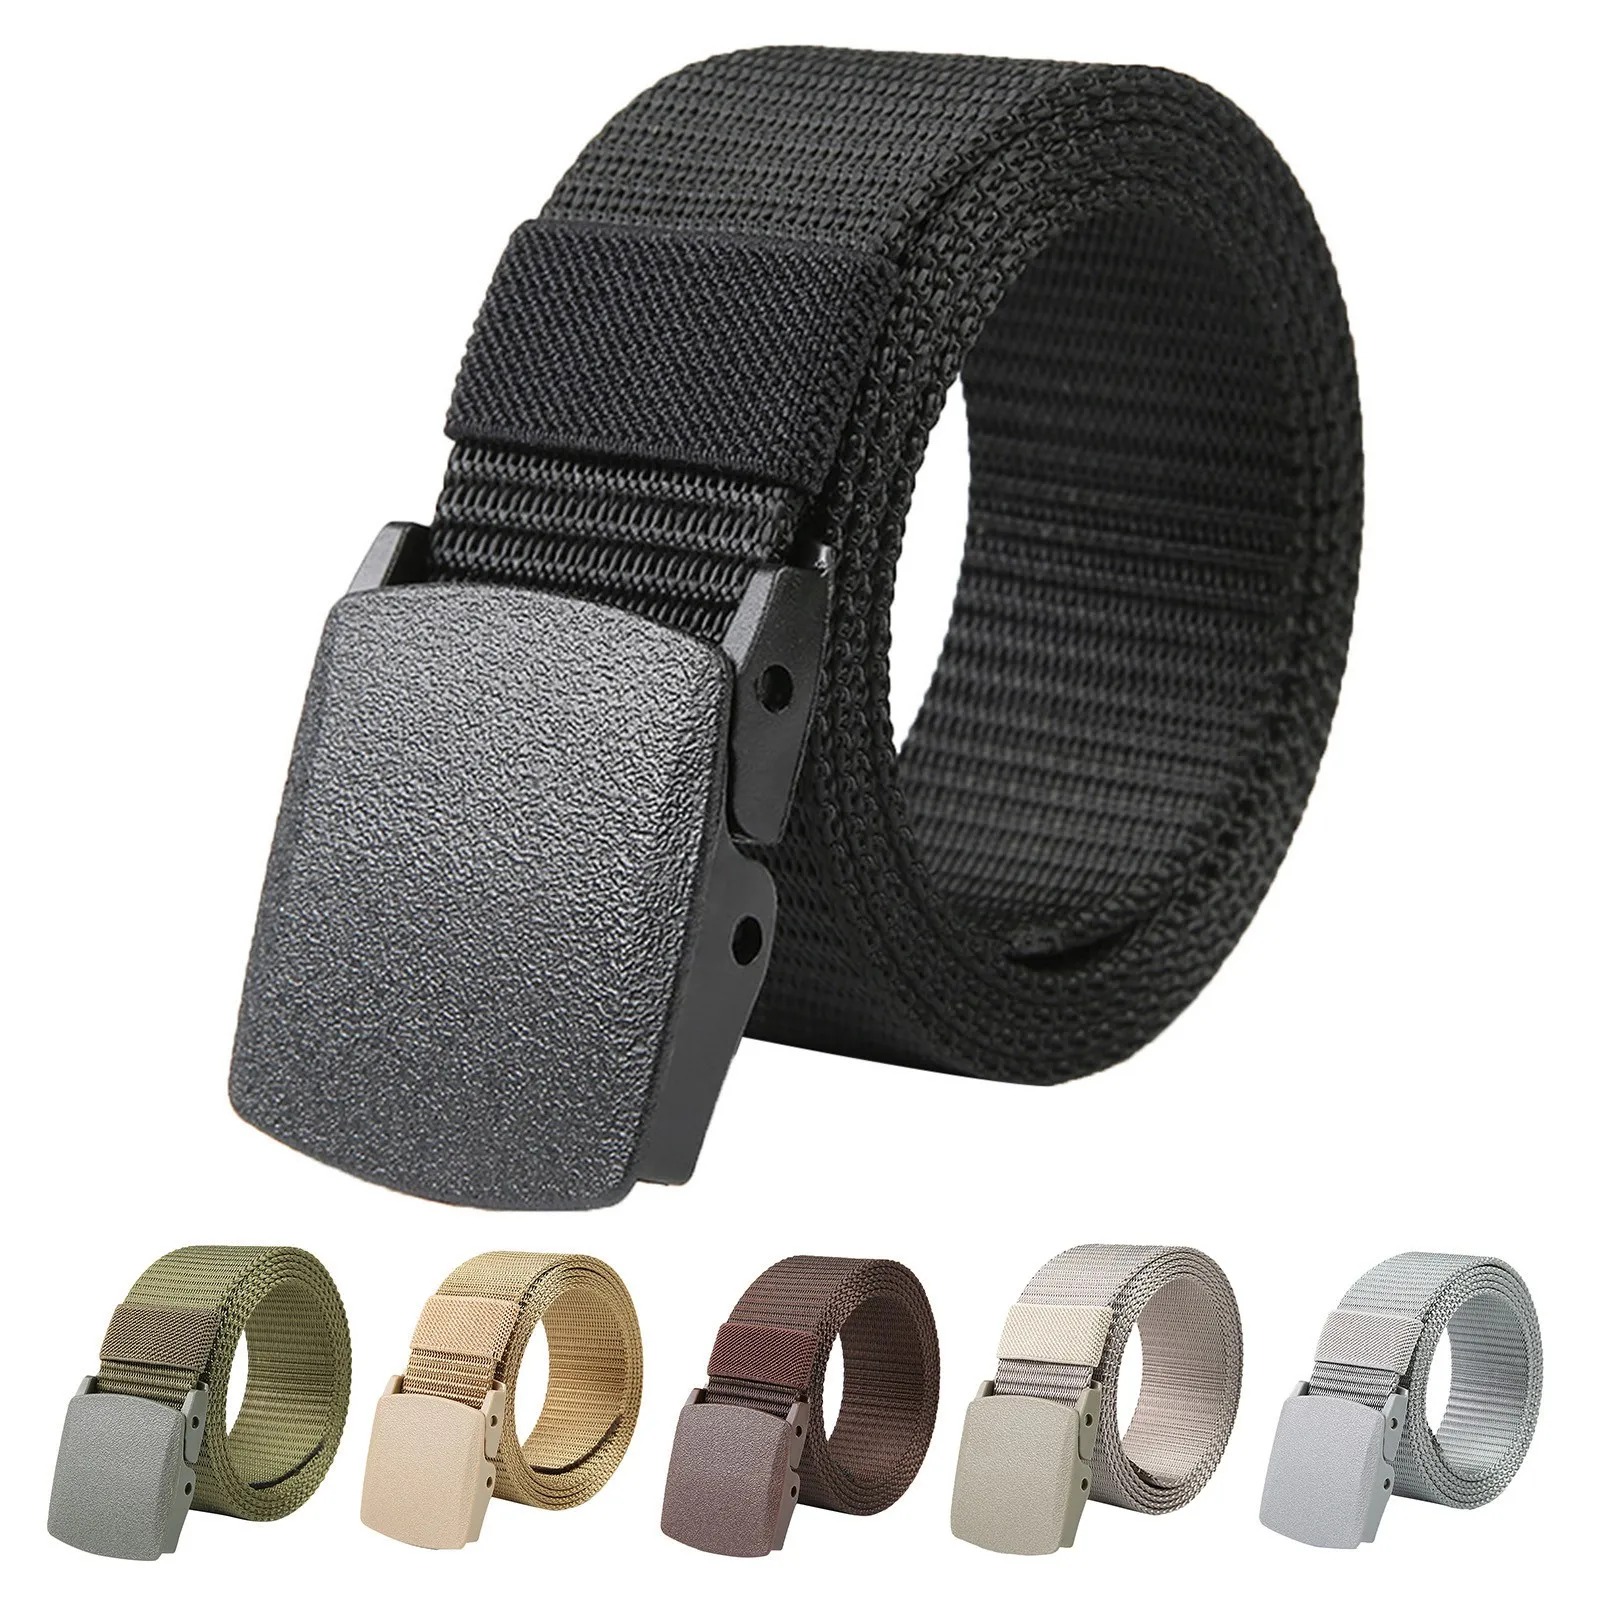 1pc Outdoor Multifunctional Tactical Belts Automatic Buckle Nylon Canvas Waist Belts For Men Women Outdoor Hunting Military Belt